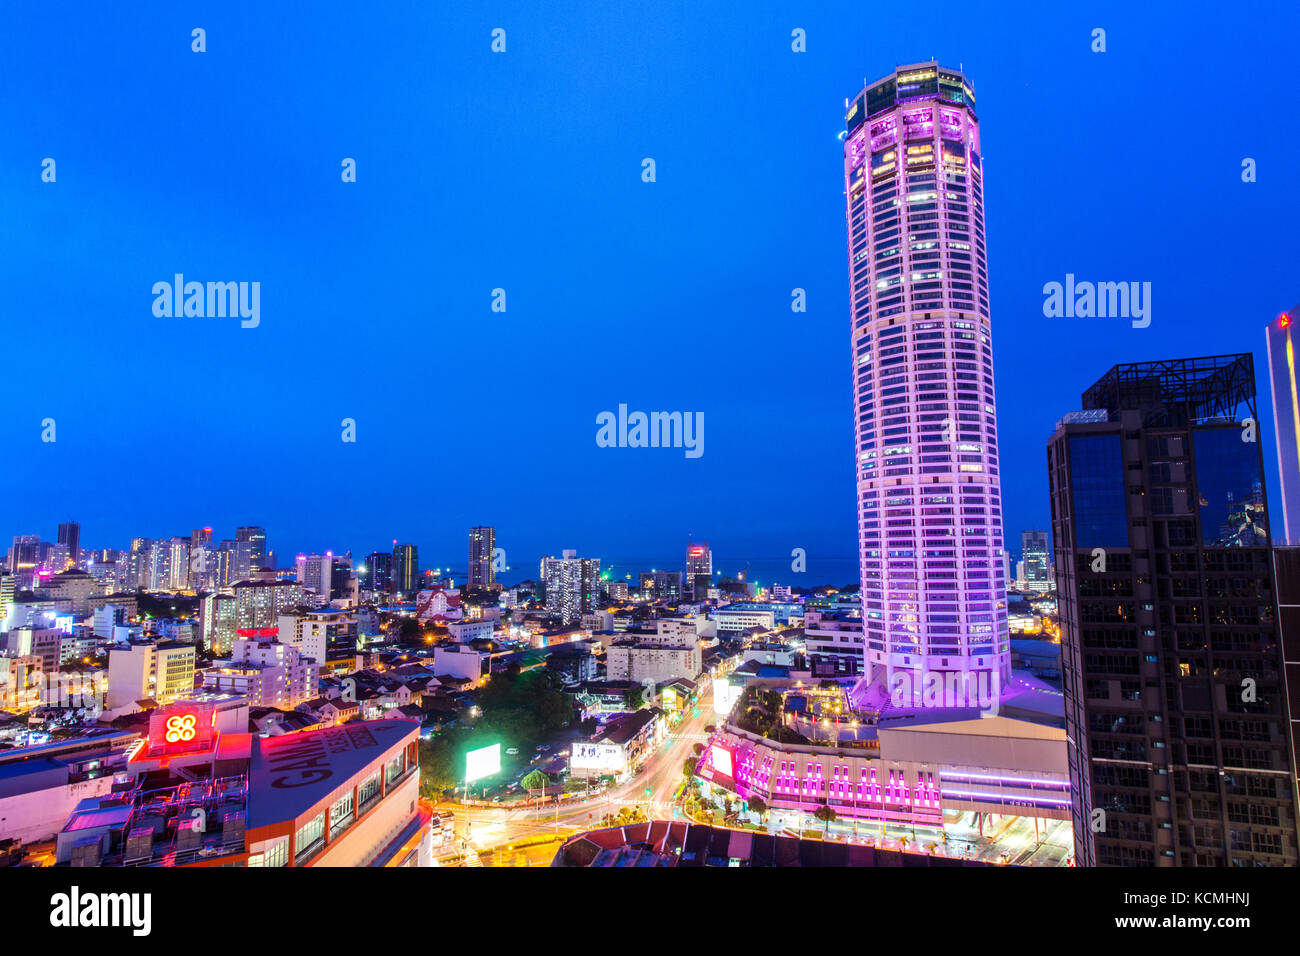 PENANG, MALAYSIA - Sept 15, 2017: The skyline of George Town in Penang, Malaysia during blue hour, with Komtar tower; the tallest building in Penang,  Stock Photo